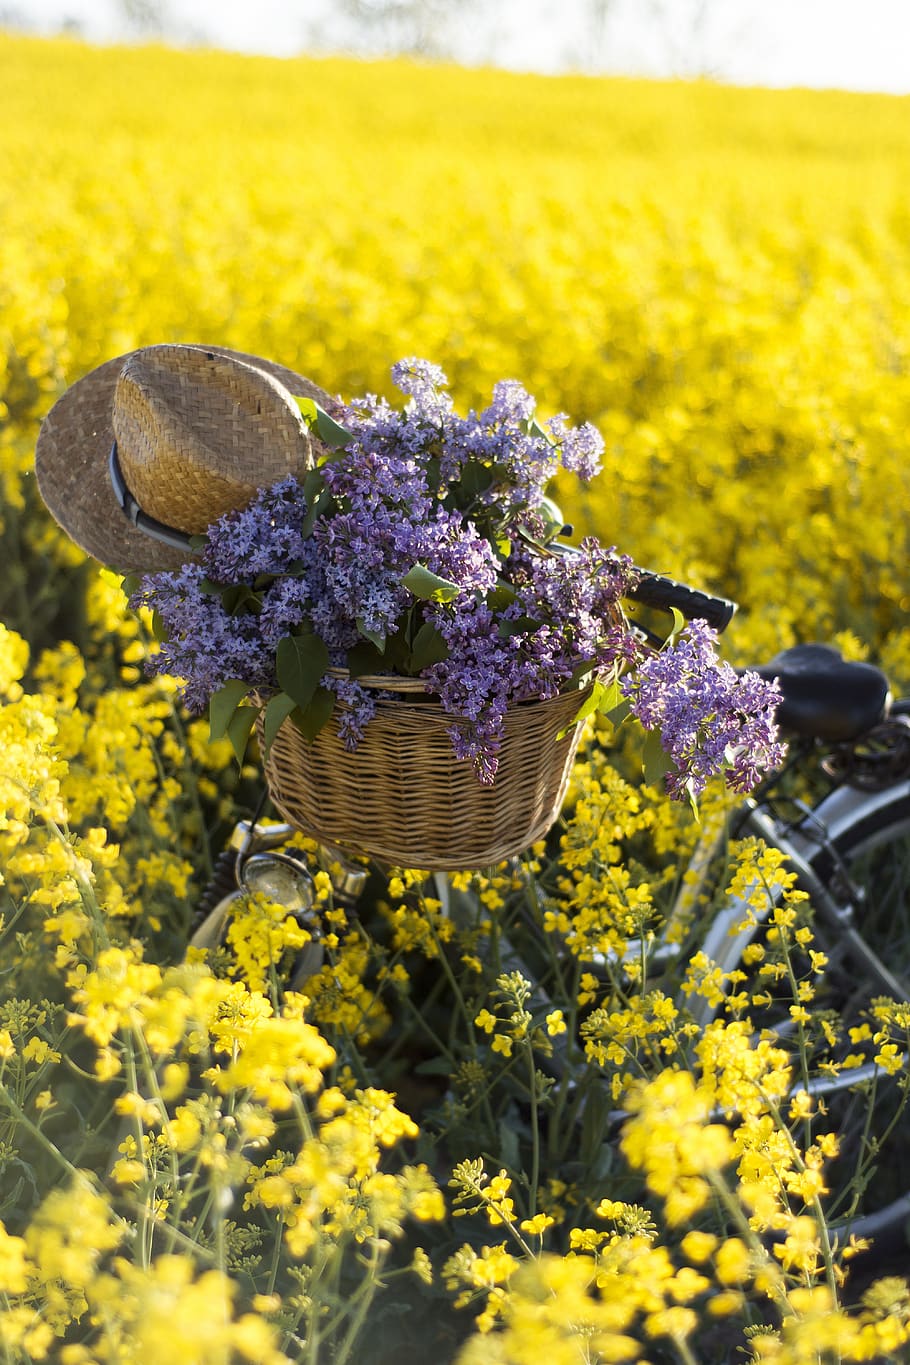 may holidays, may, rapeseed, canola field, field, without, bike, poland, landscape, nature